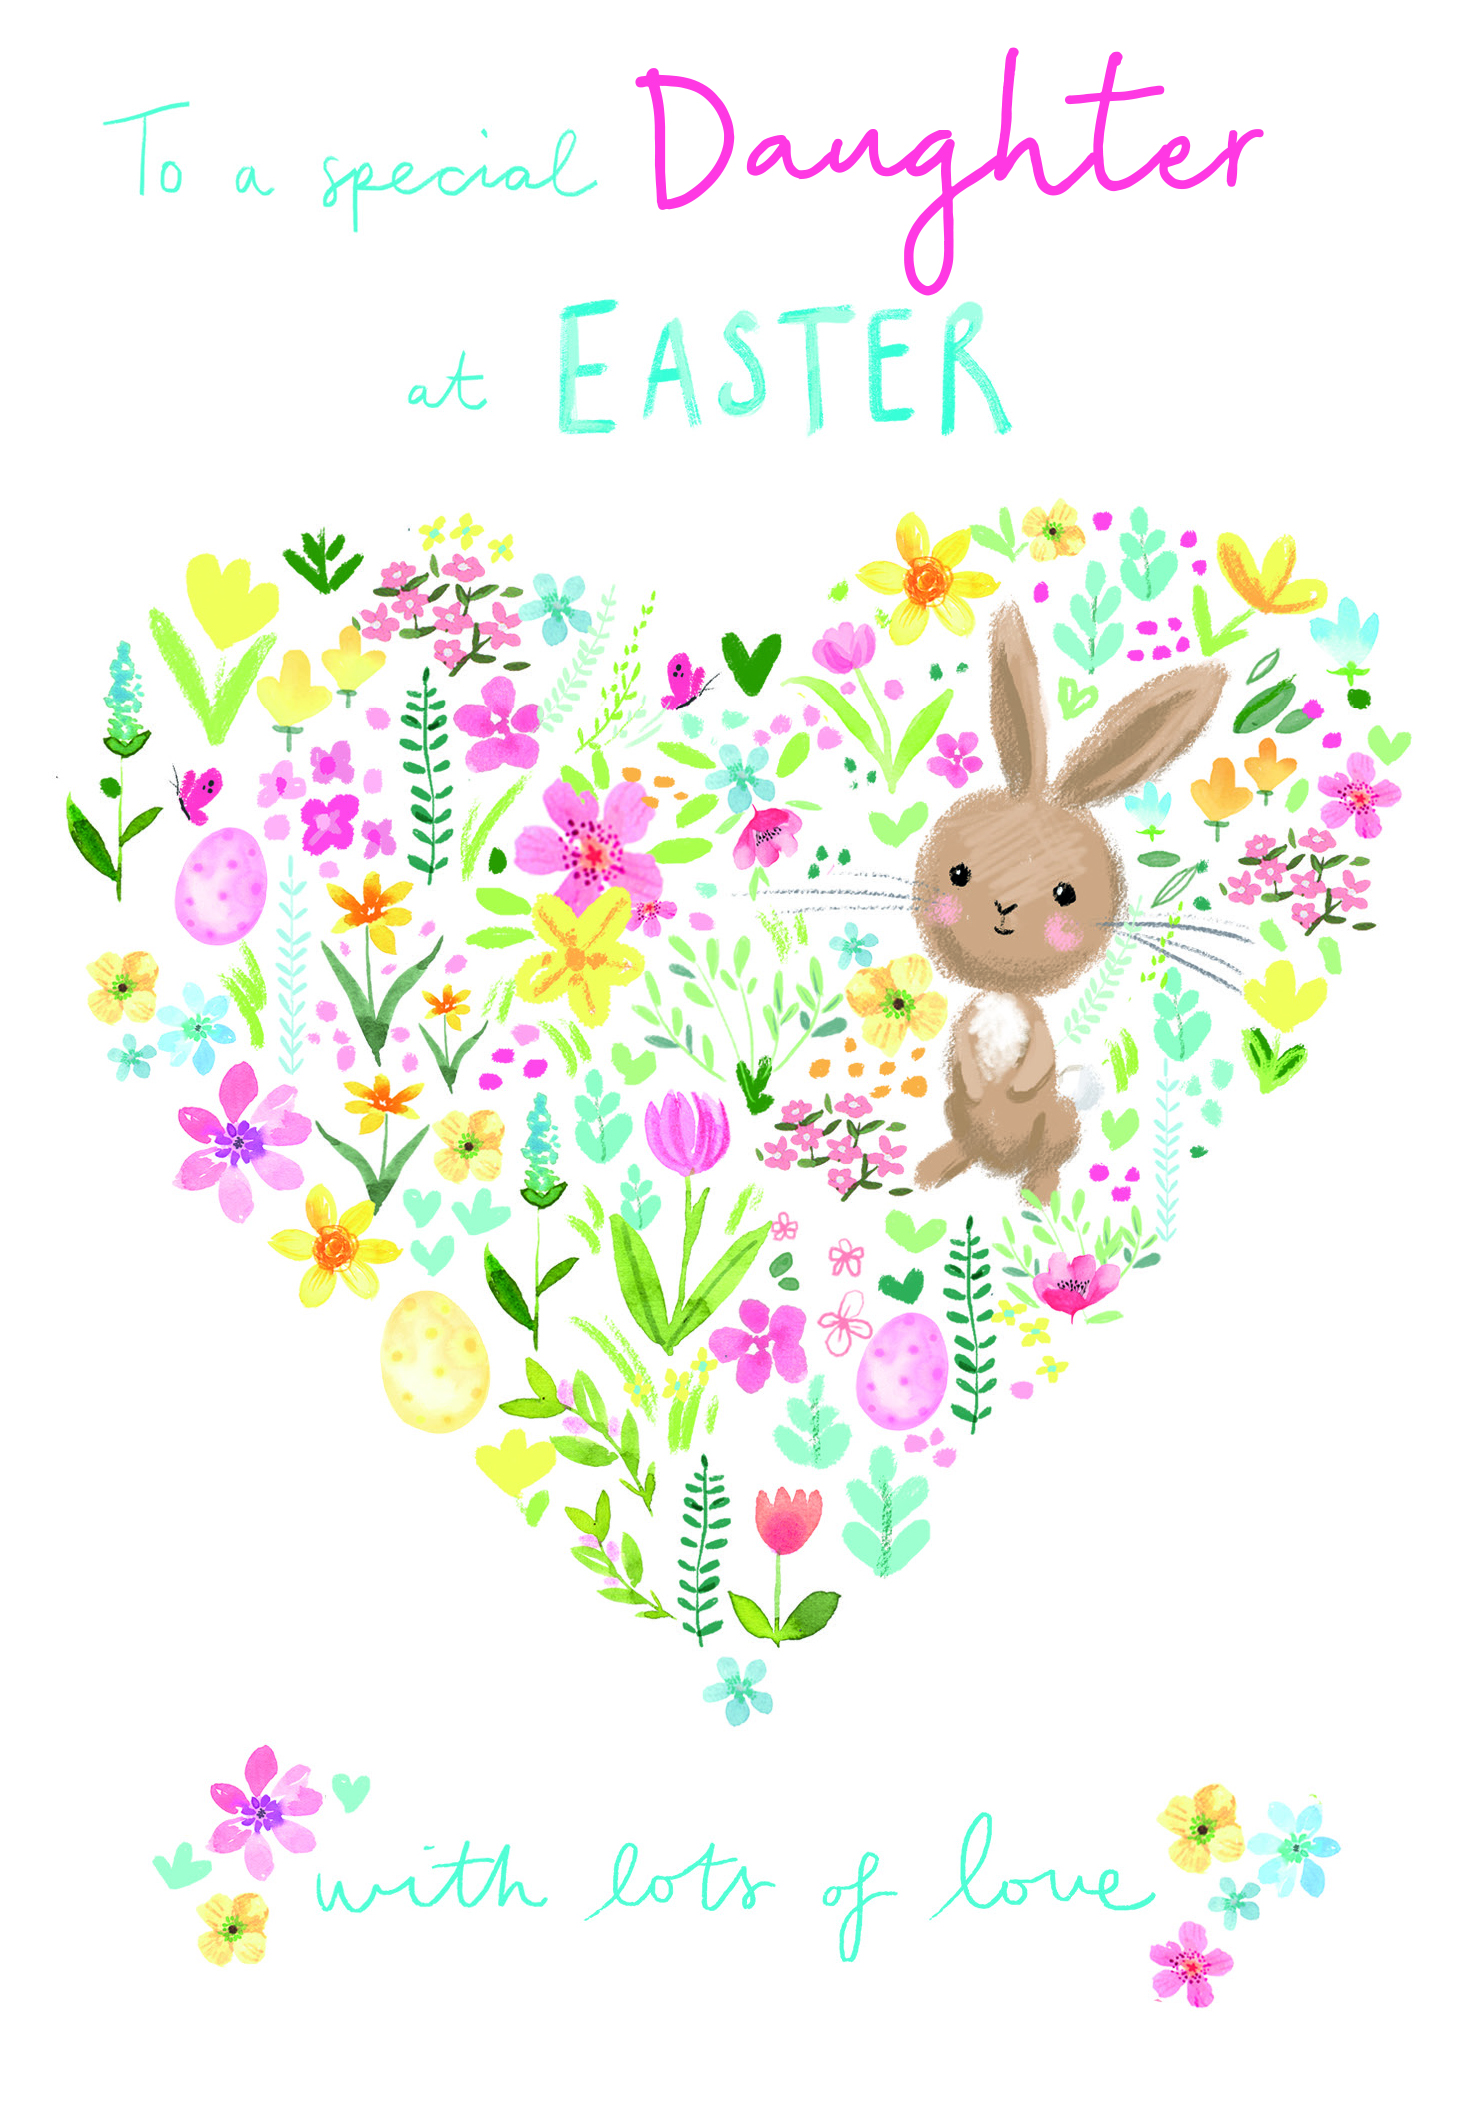 Above: An adorable Easter bunny on an Abacus relations design for Spring Seasons 2020.